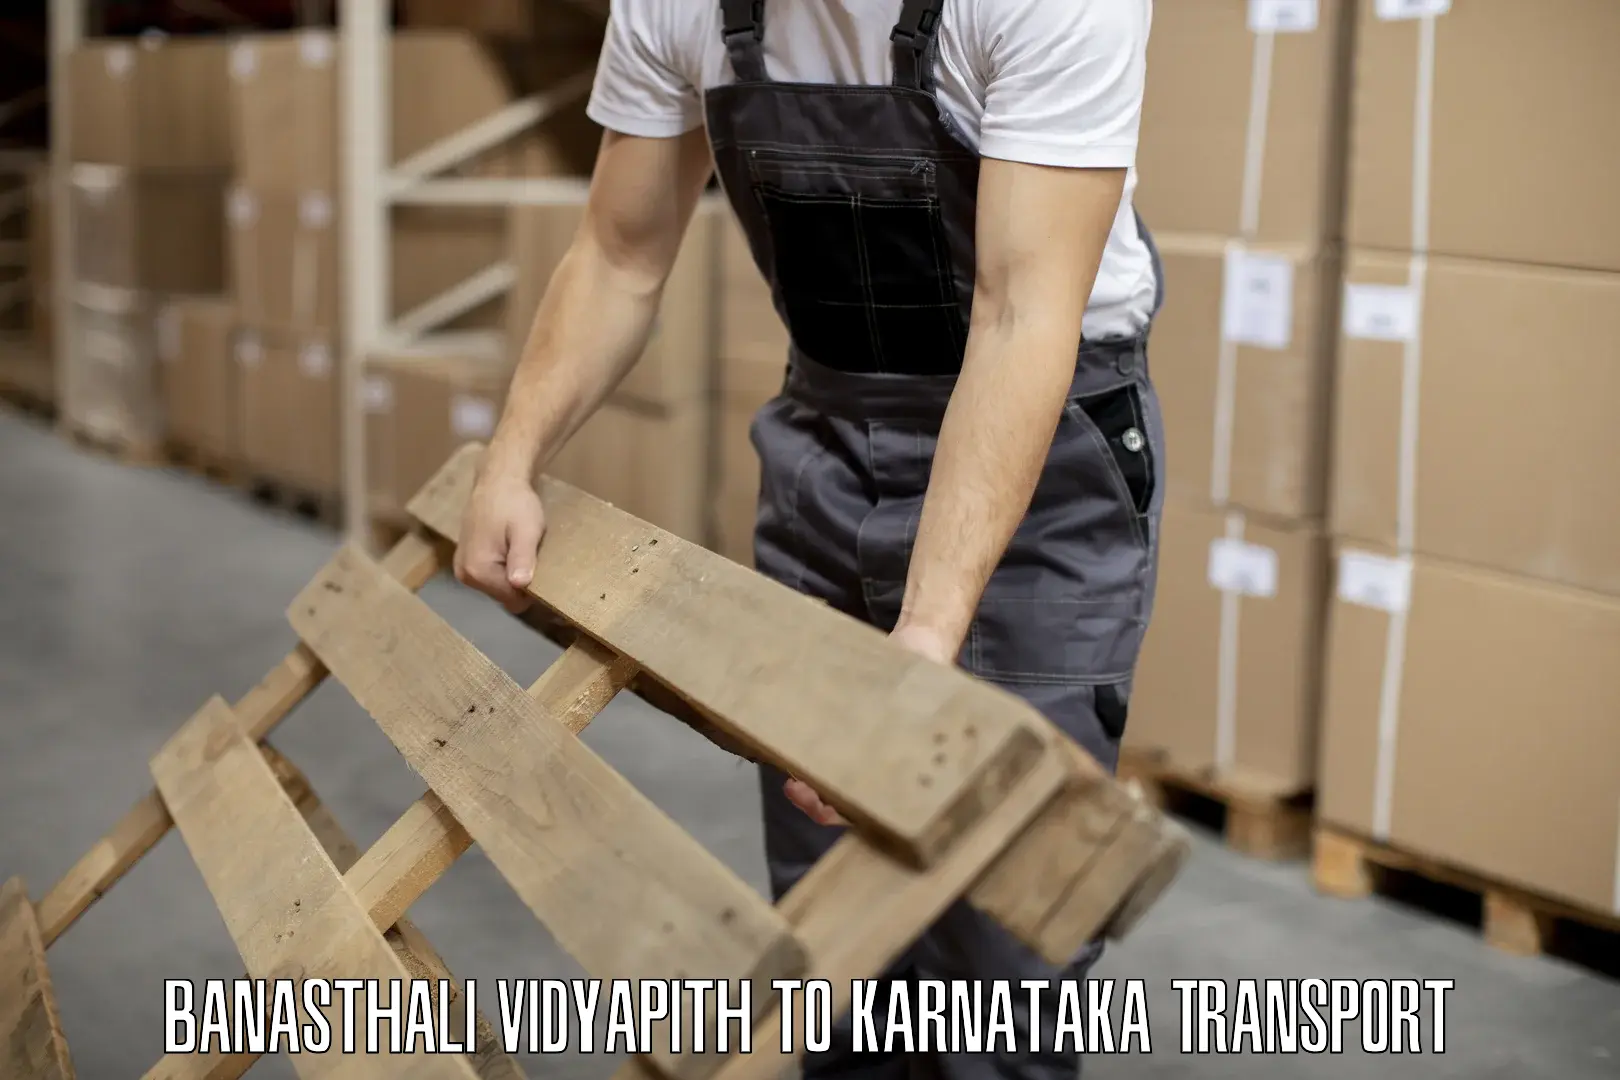 Truck transport companies in India Banasthali Vidyapith to Manipal Academy of Higher Education